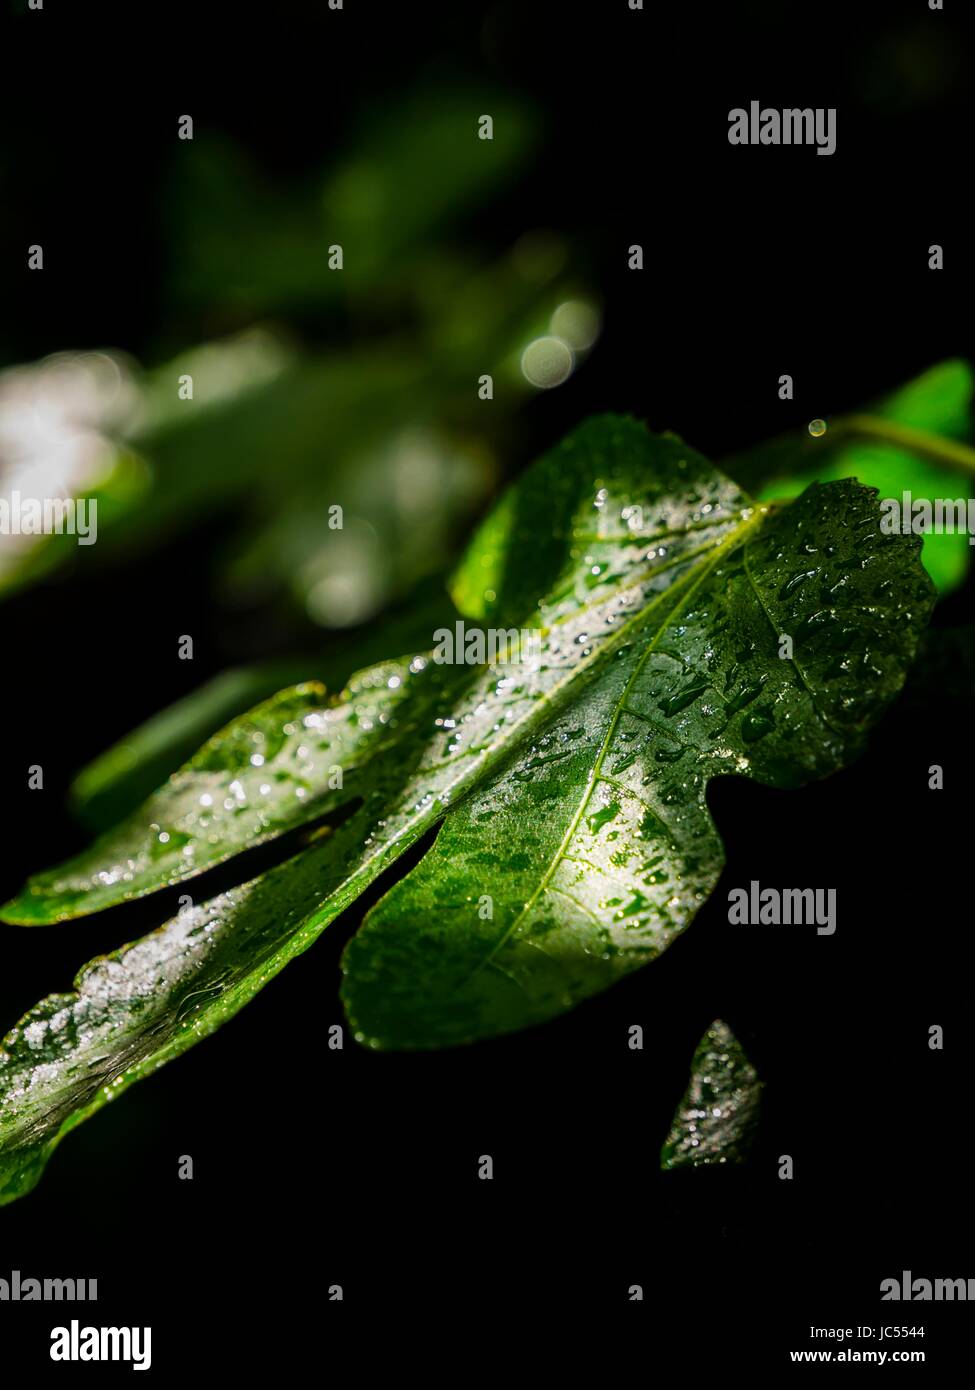 Fig tree leaf drops droplets shining shine on surface after rain Stock Photo